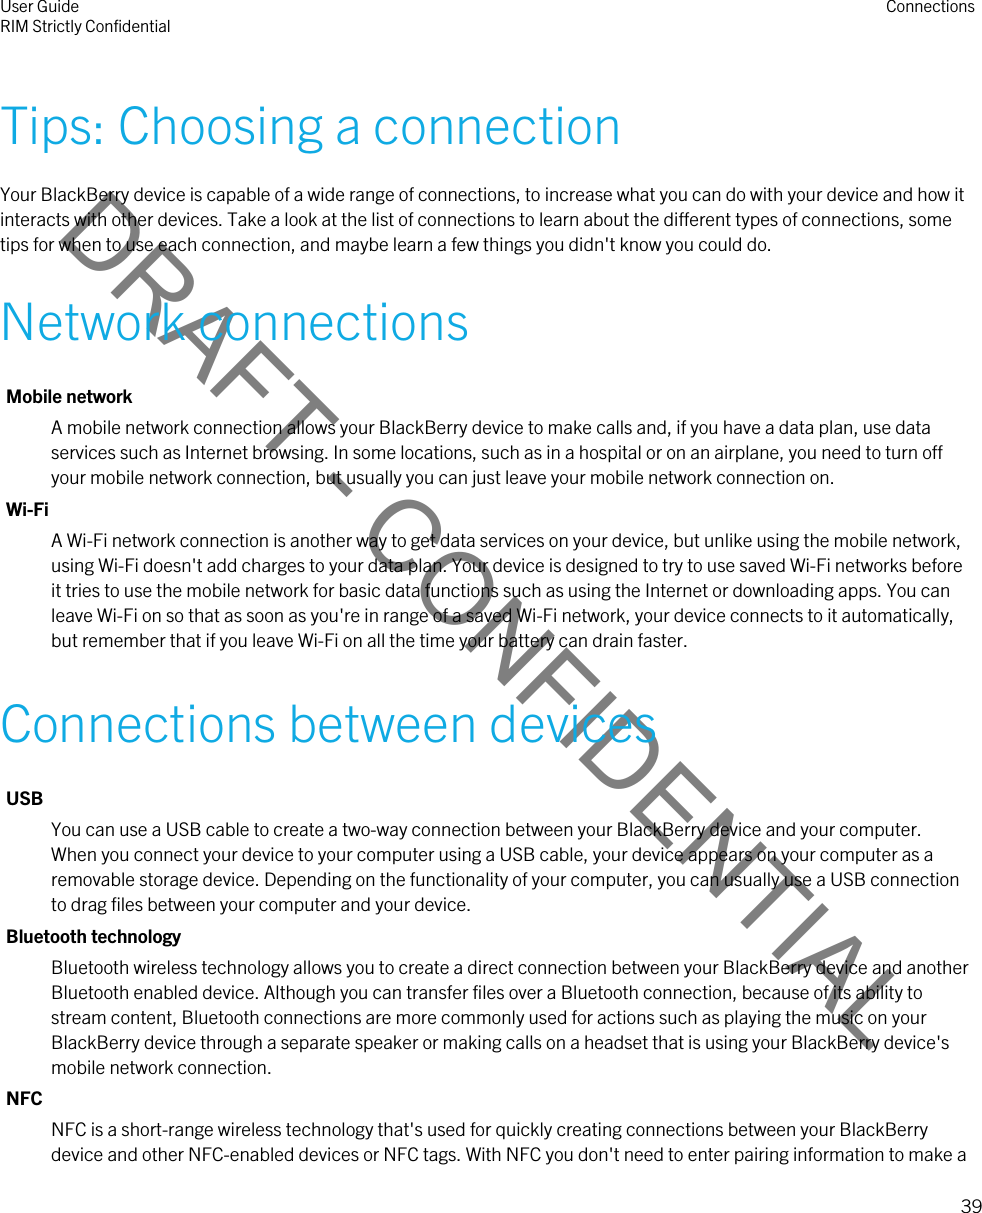 DRAFT - CONFIDENTIALTips: Choosing a connectionYour BlackBerry device is capable of a wide range of connections, to increase what you can do with your device and how it interacts with other devices. Take a look at the list of connections to learn about the different types of connections, some tips for when to use each connection, and maybe learn a few things you didn&apos;t know you could do.Network connectionsMobile networkA mobile network connection allows your BlackBerry device to make calls and, if you have a data plan, use data services such as Internet browsing. In some locations, such as in a hospital or on an airplane, you need to turn off your mobile network connection, but usually you can just leave your mobile network connection on.Wi-FiA Wi-Fi network connection is another way to get data services on your device, but unlike using the mobile network, using Wi-Fi doesn&apos;t add charges to your data plan. Your device is designed to try to use saved Wi-Fi networks before it tries to use the mobile network for basic data functions such as using the Internet or downloading apps. You can leave Wi-Fi on so that as soon as you&apos;re in range of a saved Wi-Fi network, your device connects to it automatically, but remember that if you leave Wi-Fi on all the time your battery can drain faster.Connections between devicesUSBYou can use a USB cable to create a two-way connection between your BlackBerry device and your computer. When you connect your device to your computer using a USB cable, your device appears on your computer as a removable storage device. Depending on the functionality of your computer, you can usually use a USB connection to drag files between your computer and your device.Bluetooth technologyBluetooth wireless technology allows you to create a direct connection between your BlackBerry device and another Bluetooth enabled device. Although you can transfer files over a Bluetooth connection, because of its ability to stream content, Bluetooth connections are more commonly used for actions such as playing the music on your BlackBerry device through a separate speaker or making calls on a headset that is using your BlackBerry device&apos;s mobile network connection.NFCNFC is a short-range wireless technology that&apos;s used for quickly creating connections between your BlackBerry device and other NFC-enabled devices or NFC tags. With NFC you don&apos;t need to enter pairing information to make a User GuideRIM Strictly Confidential Connections39 